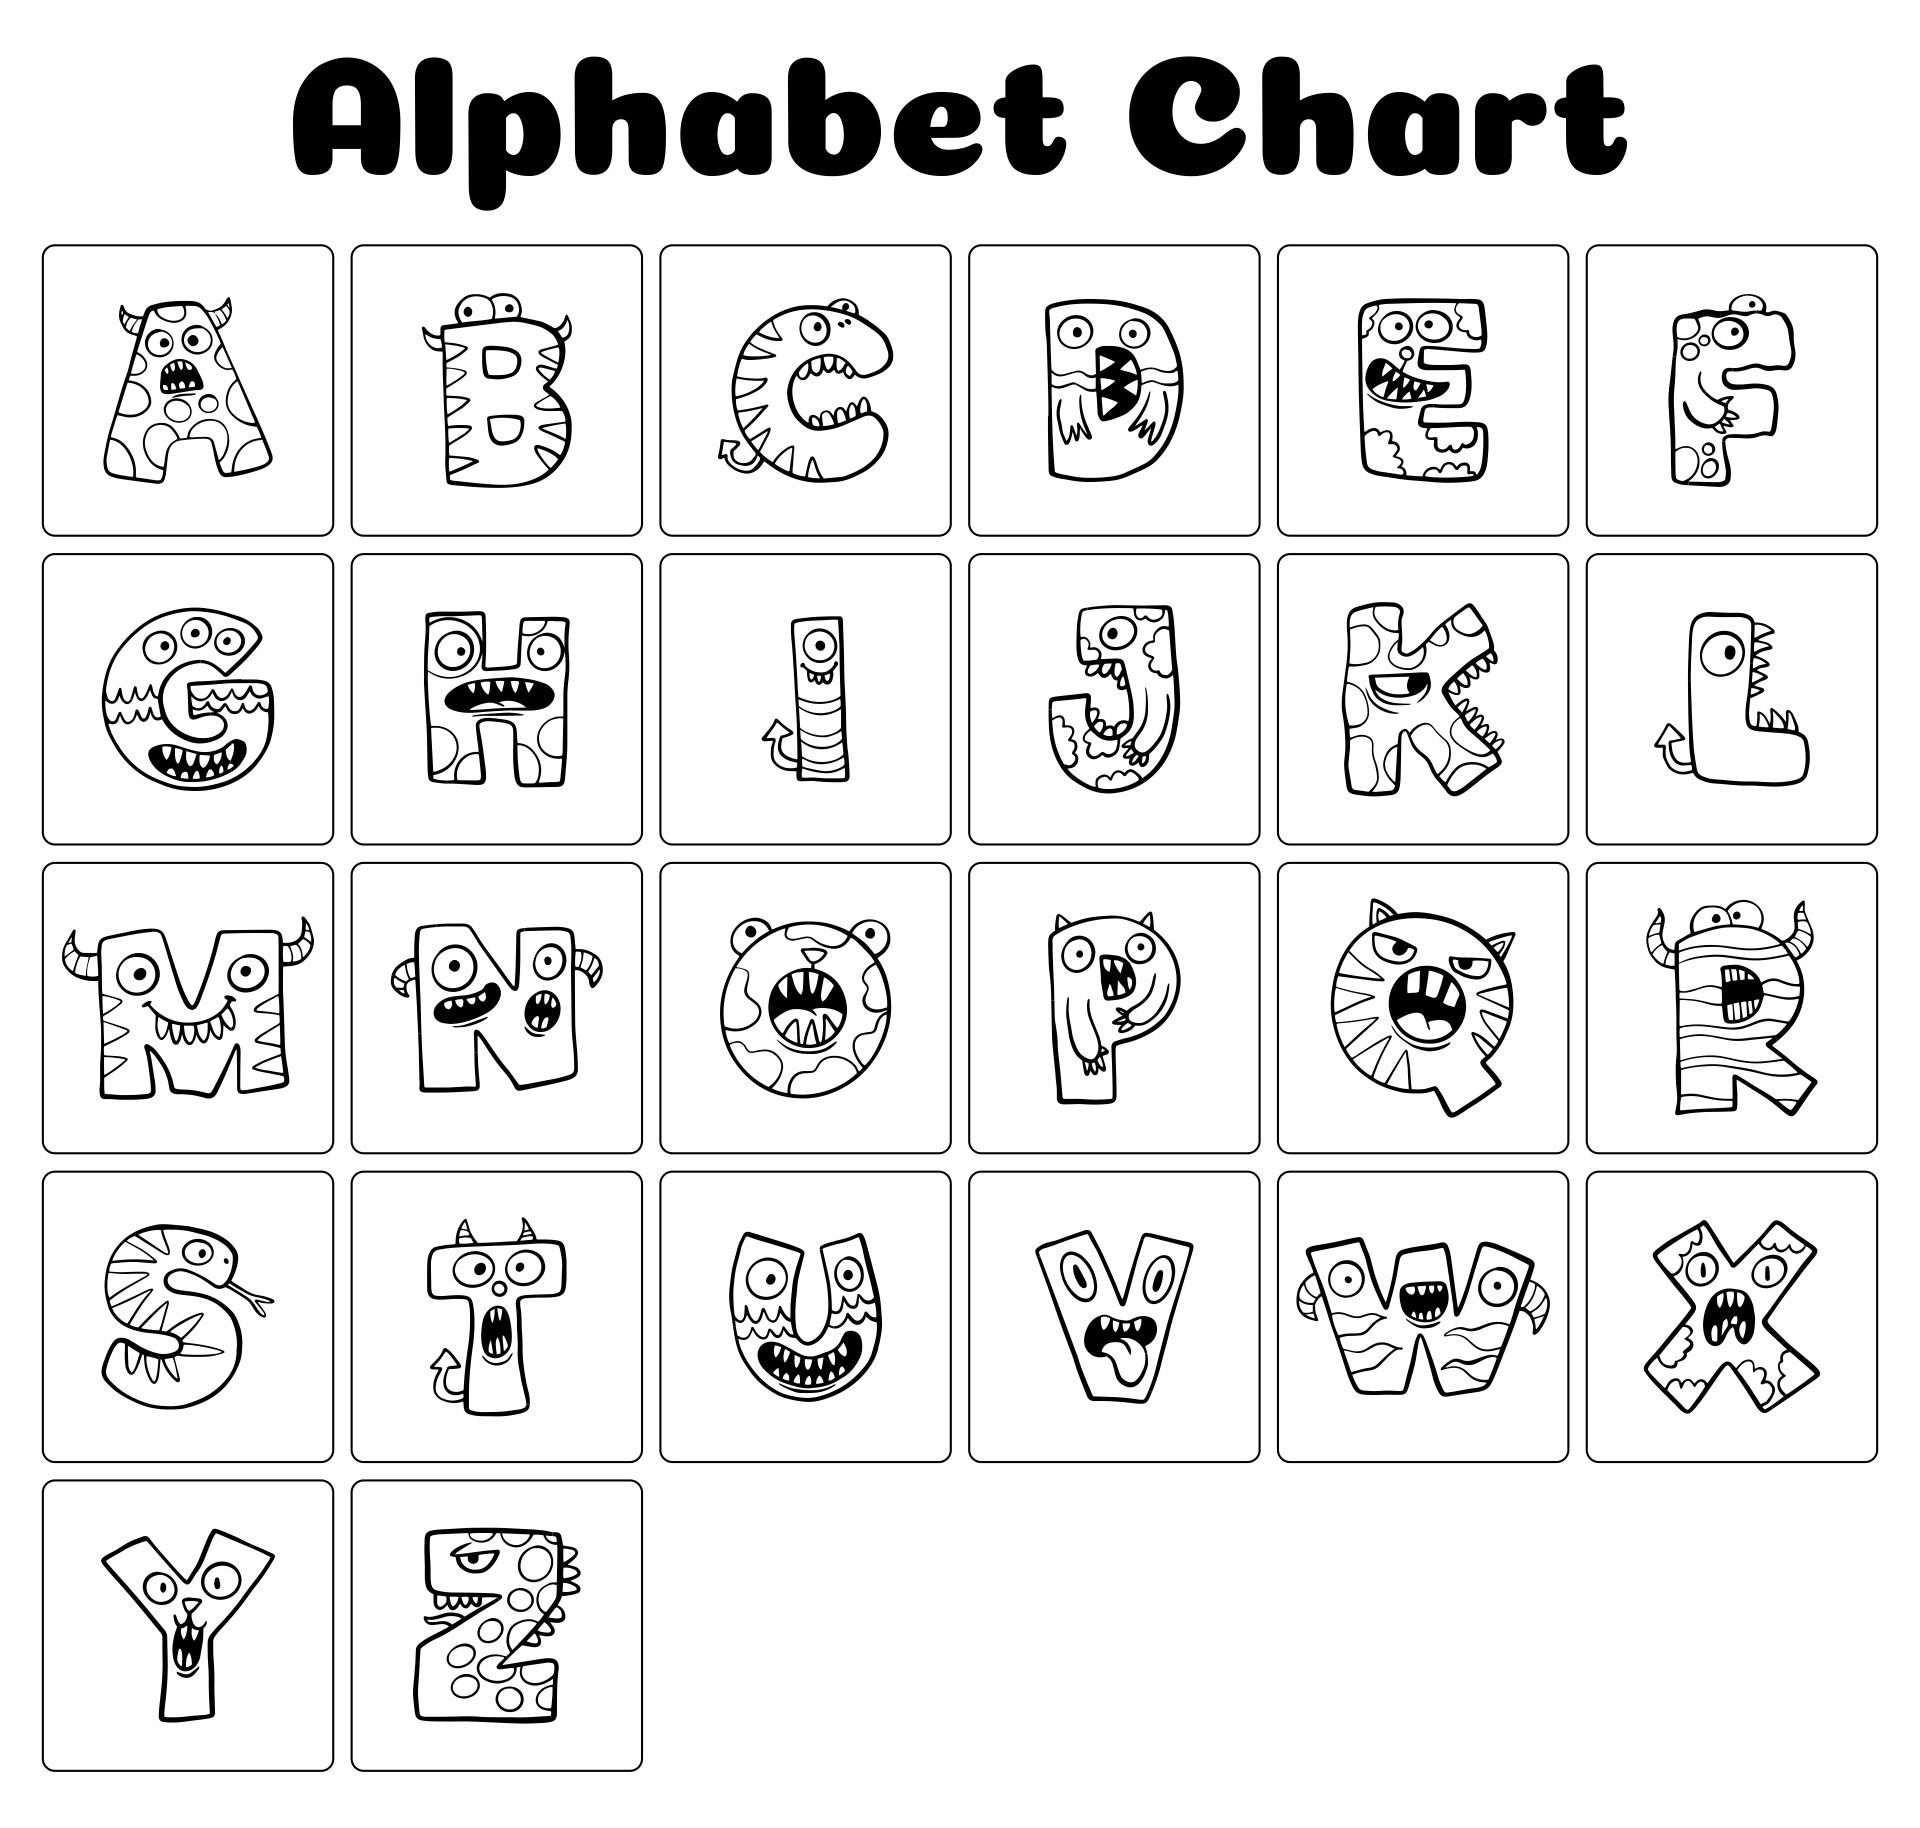 4 Best Images Of Chart Full Page Alphabet ABC Printable Preschool 